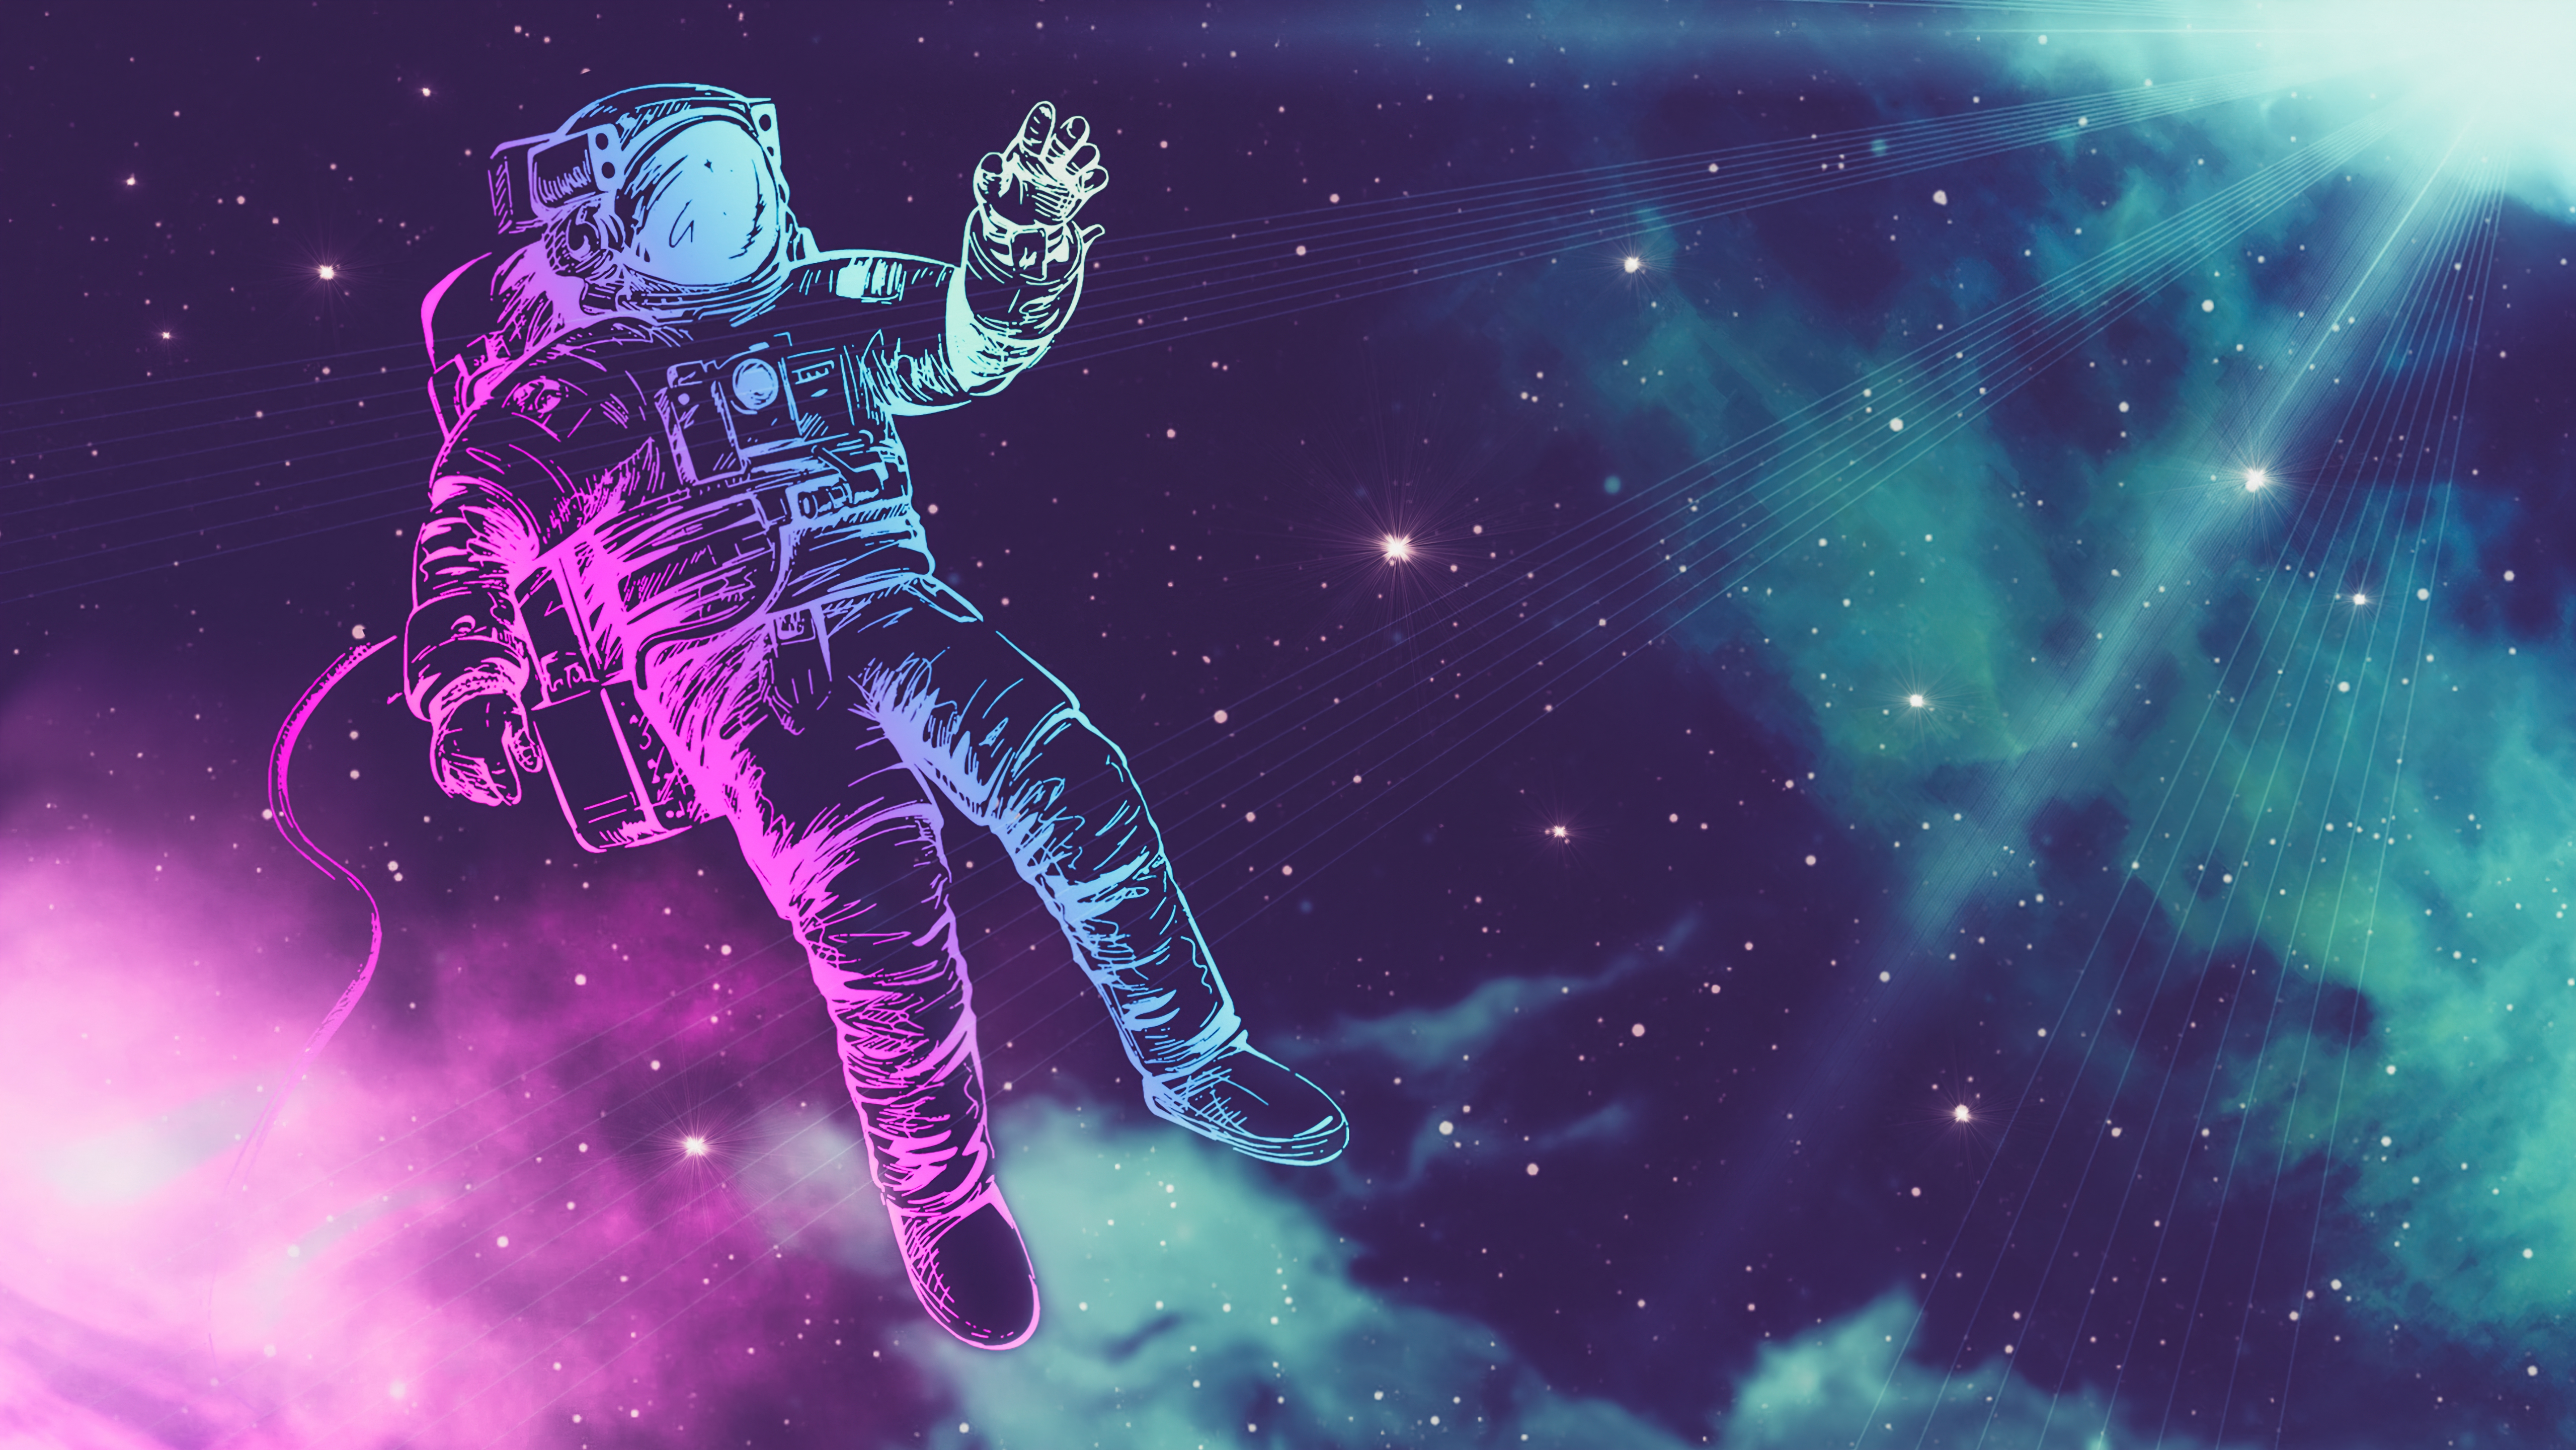 Wallpaper Planet Space Astronaut Sleeve Gesture Background  Download  Free Image